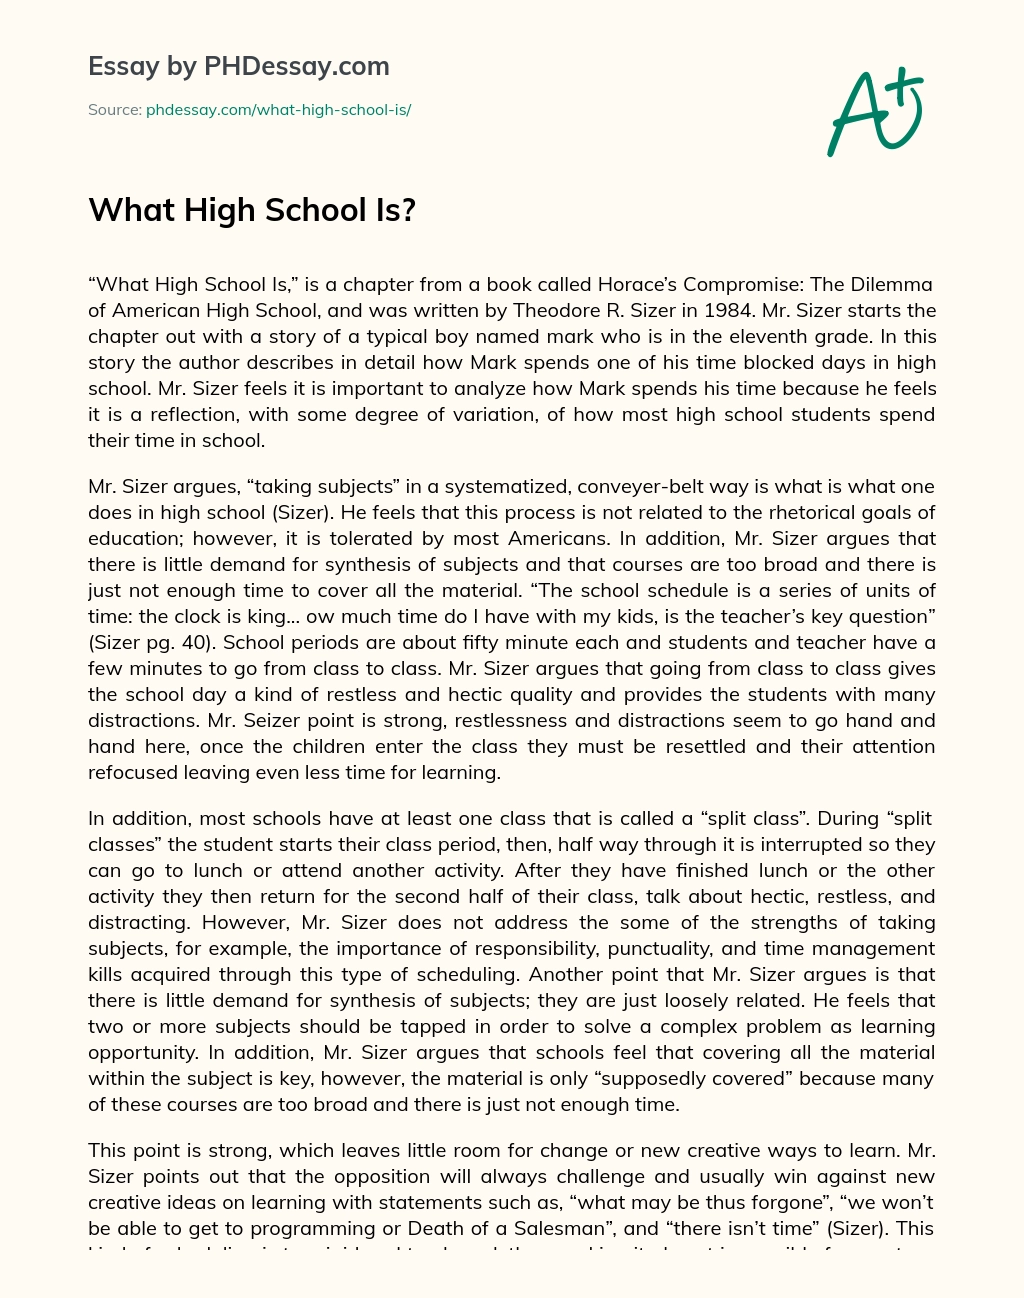 What High School Is? essay